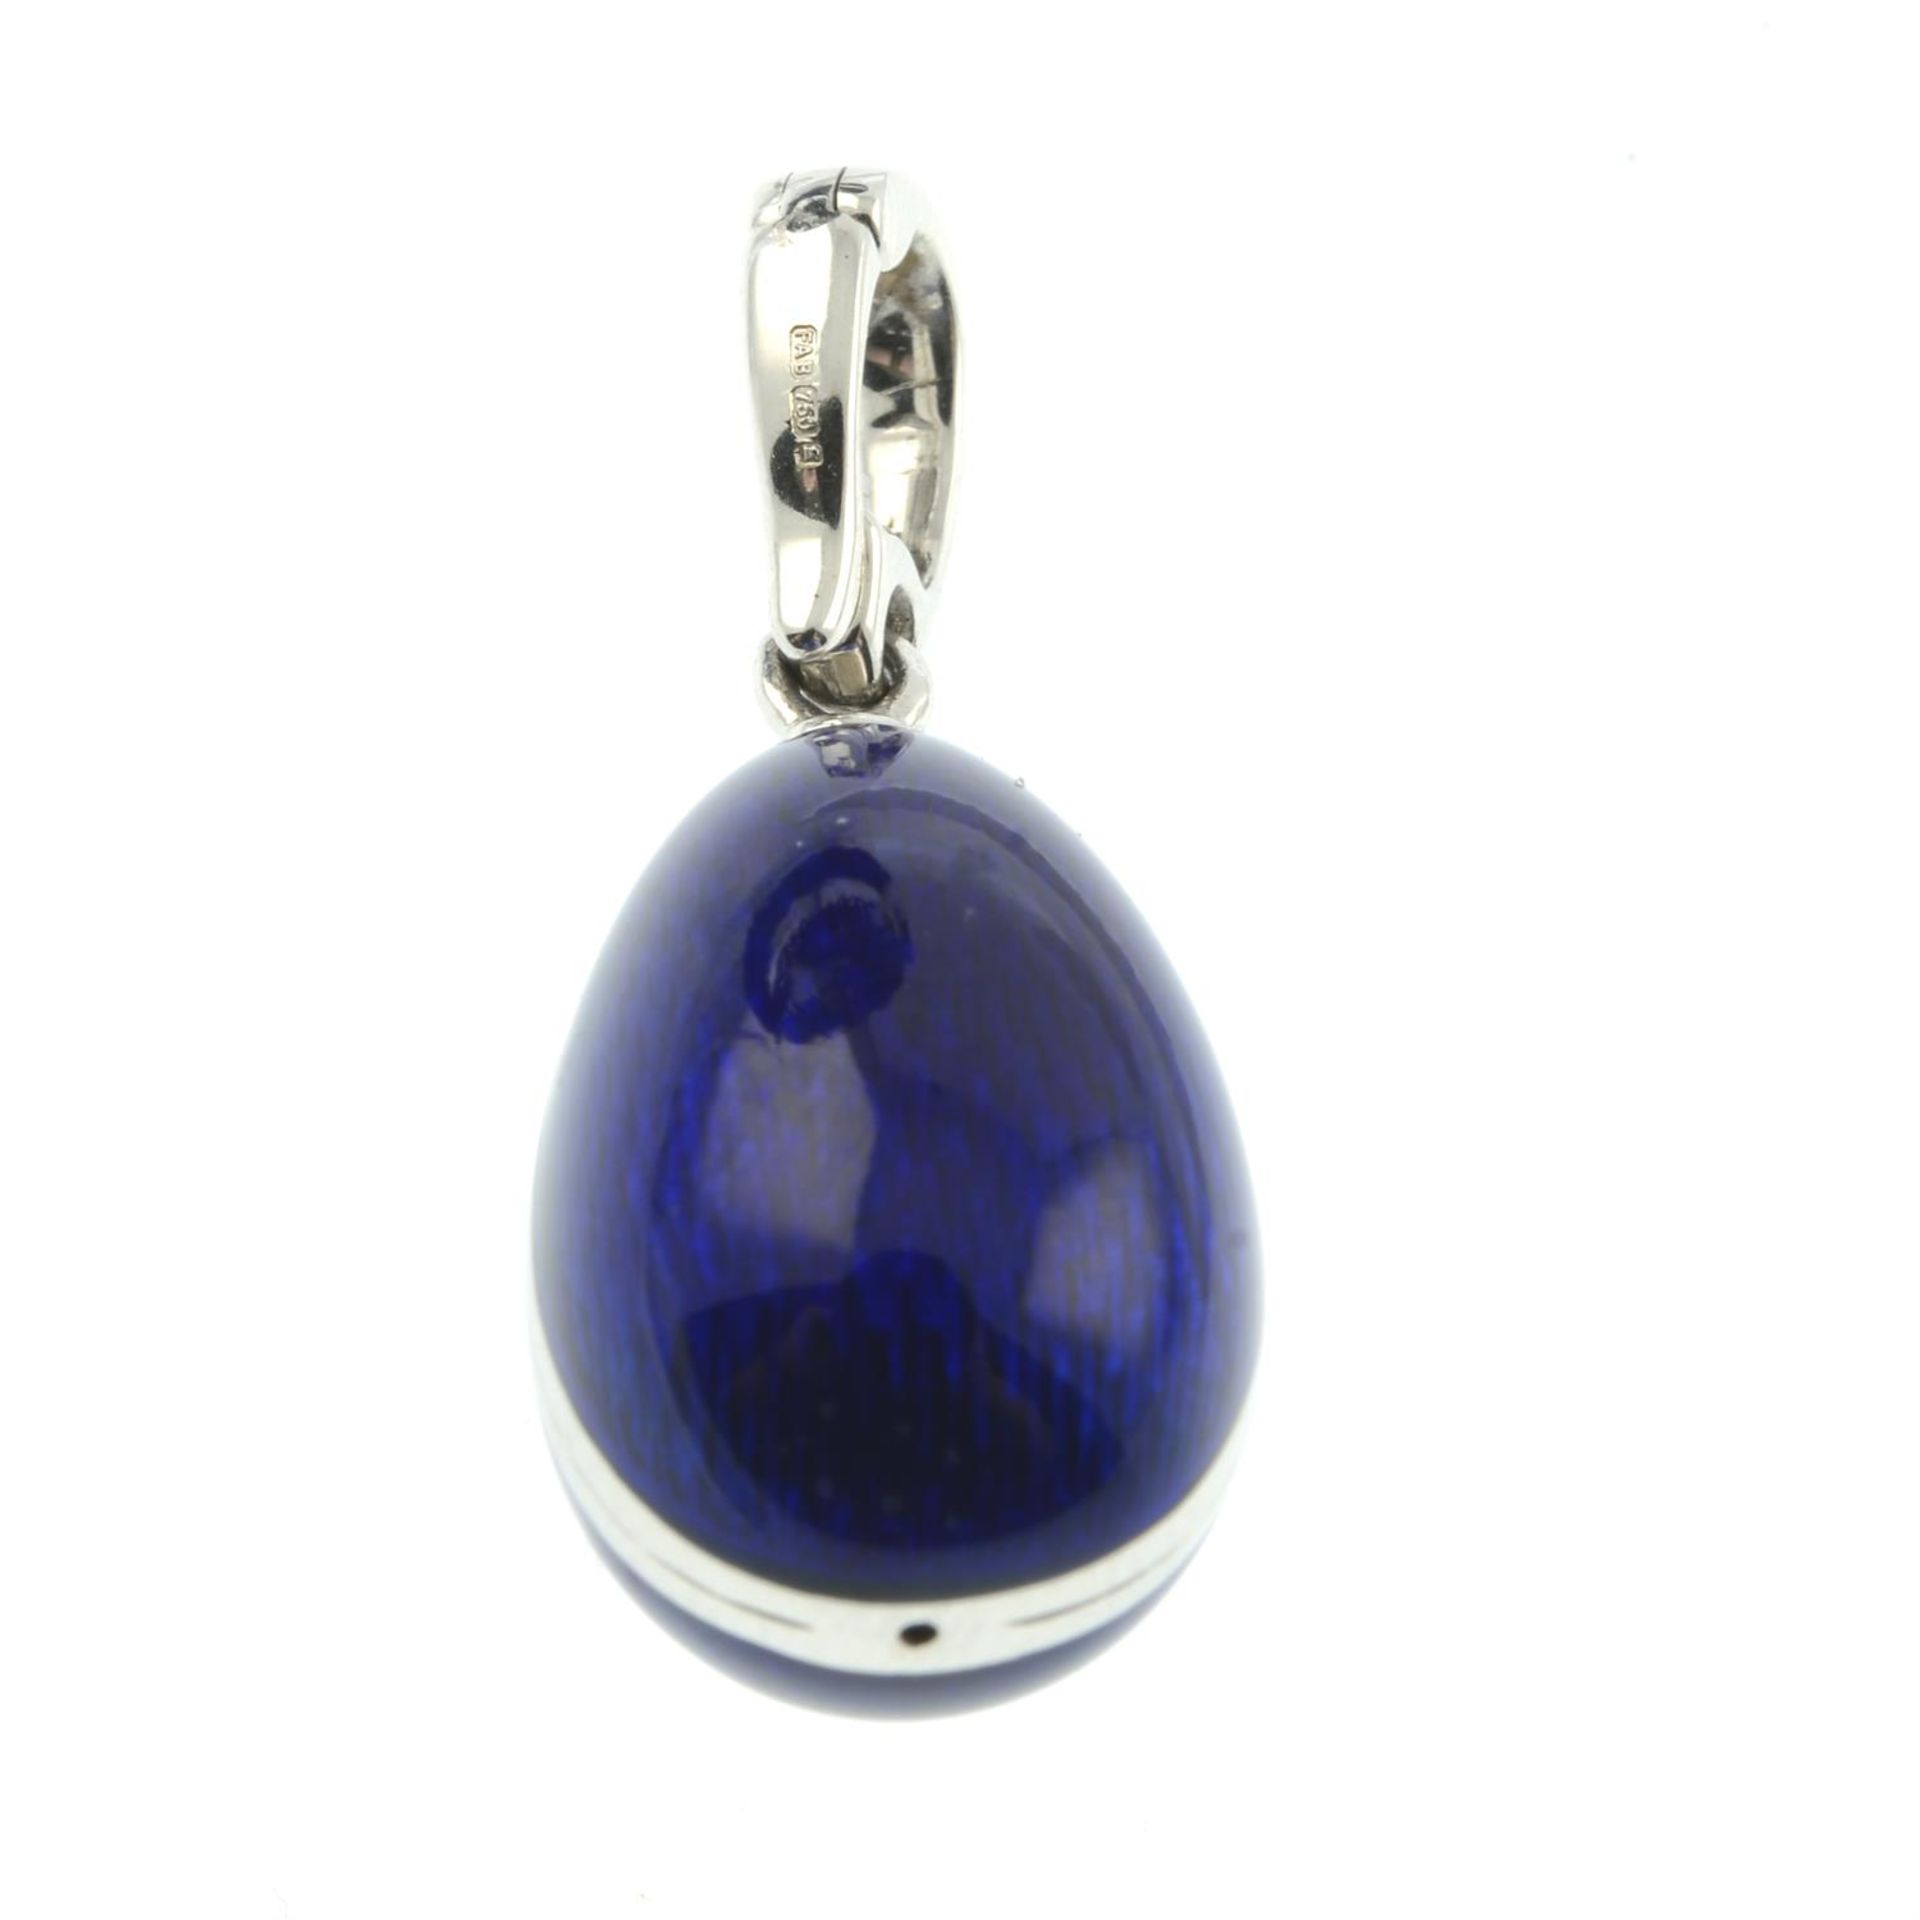 A limited edition 18ct gold blue enamel egg pendant, with diamond swan highlight, by Fabergé. - Image 3 of 5